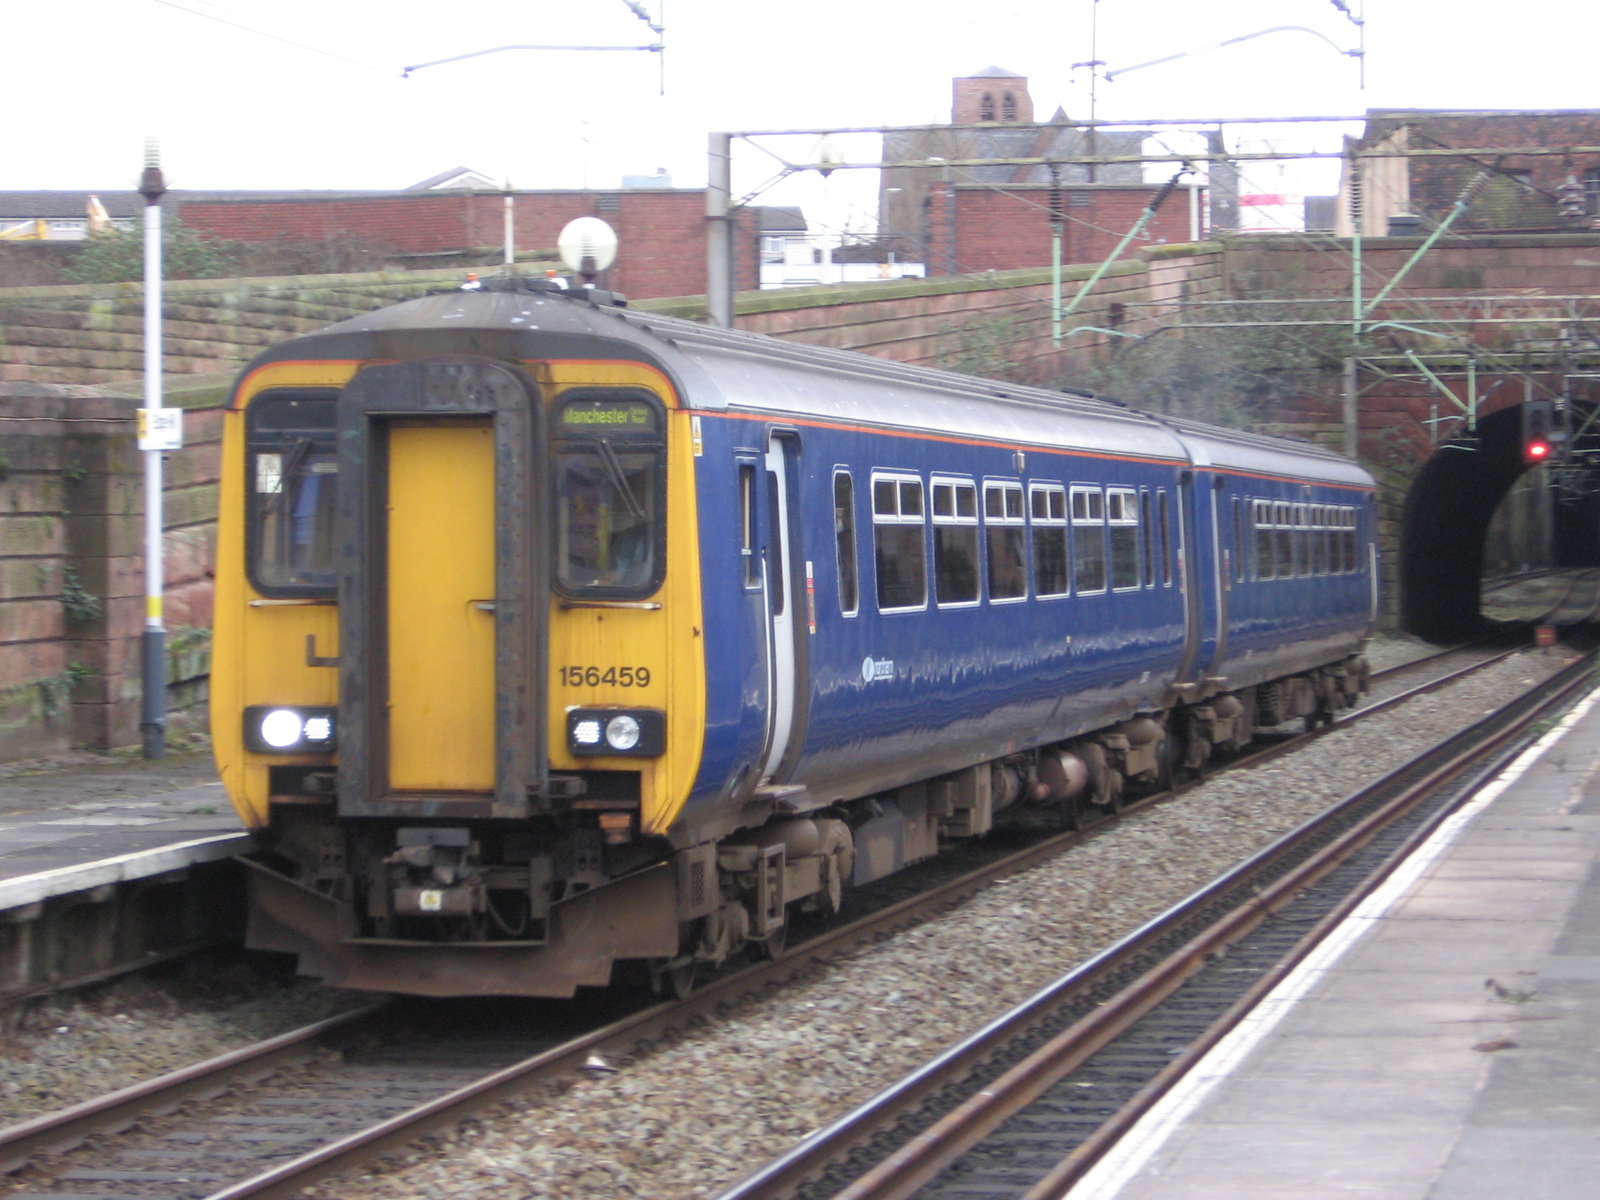 Edge Hill Liverpool-Manchester Oxford St. Northernrail 156459